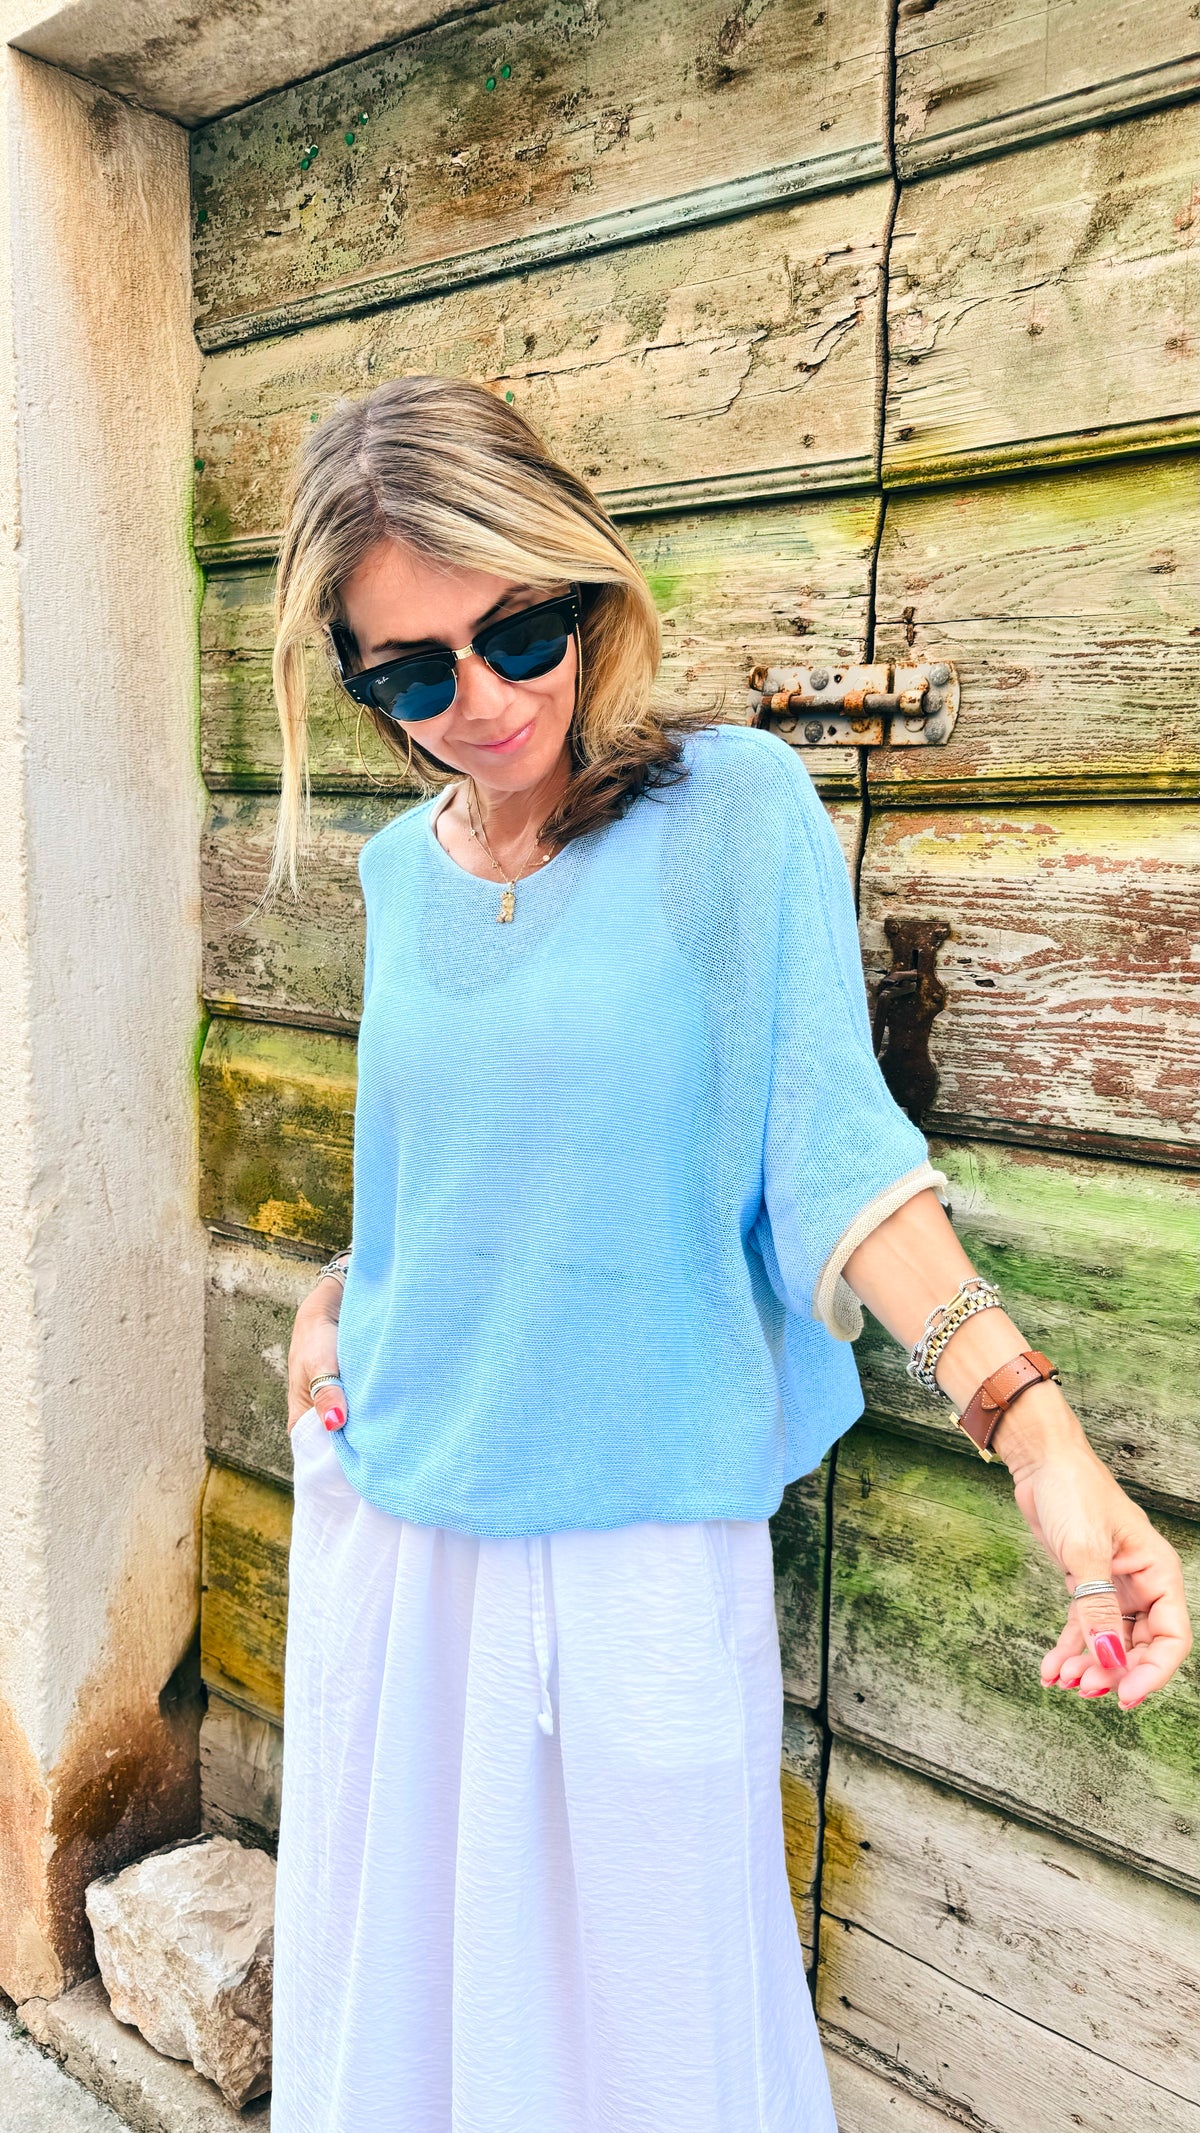 Contrast Coast Italian Knit - Light Blue/Beige-100 Sleeveless Tops-Italianissimo-Coastal Bloom Boutique, find the trendiest versions of the popular styles and looks Located in Indialantic, FL